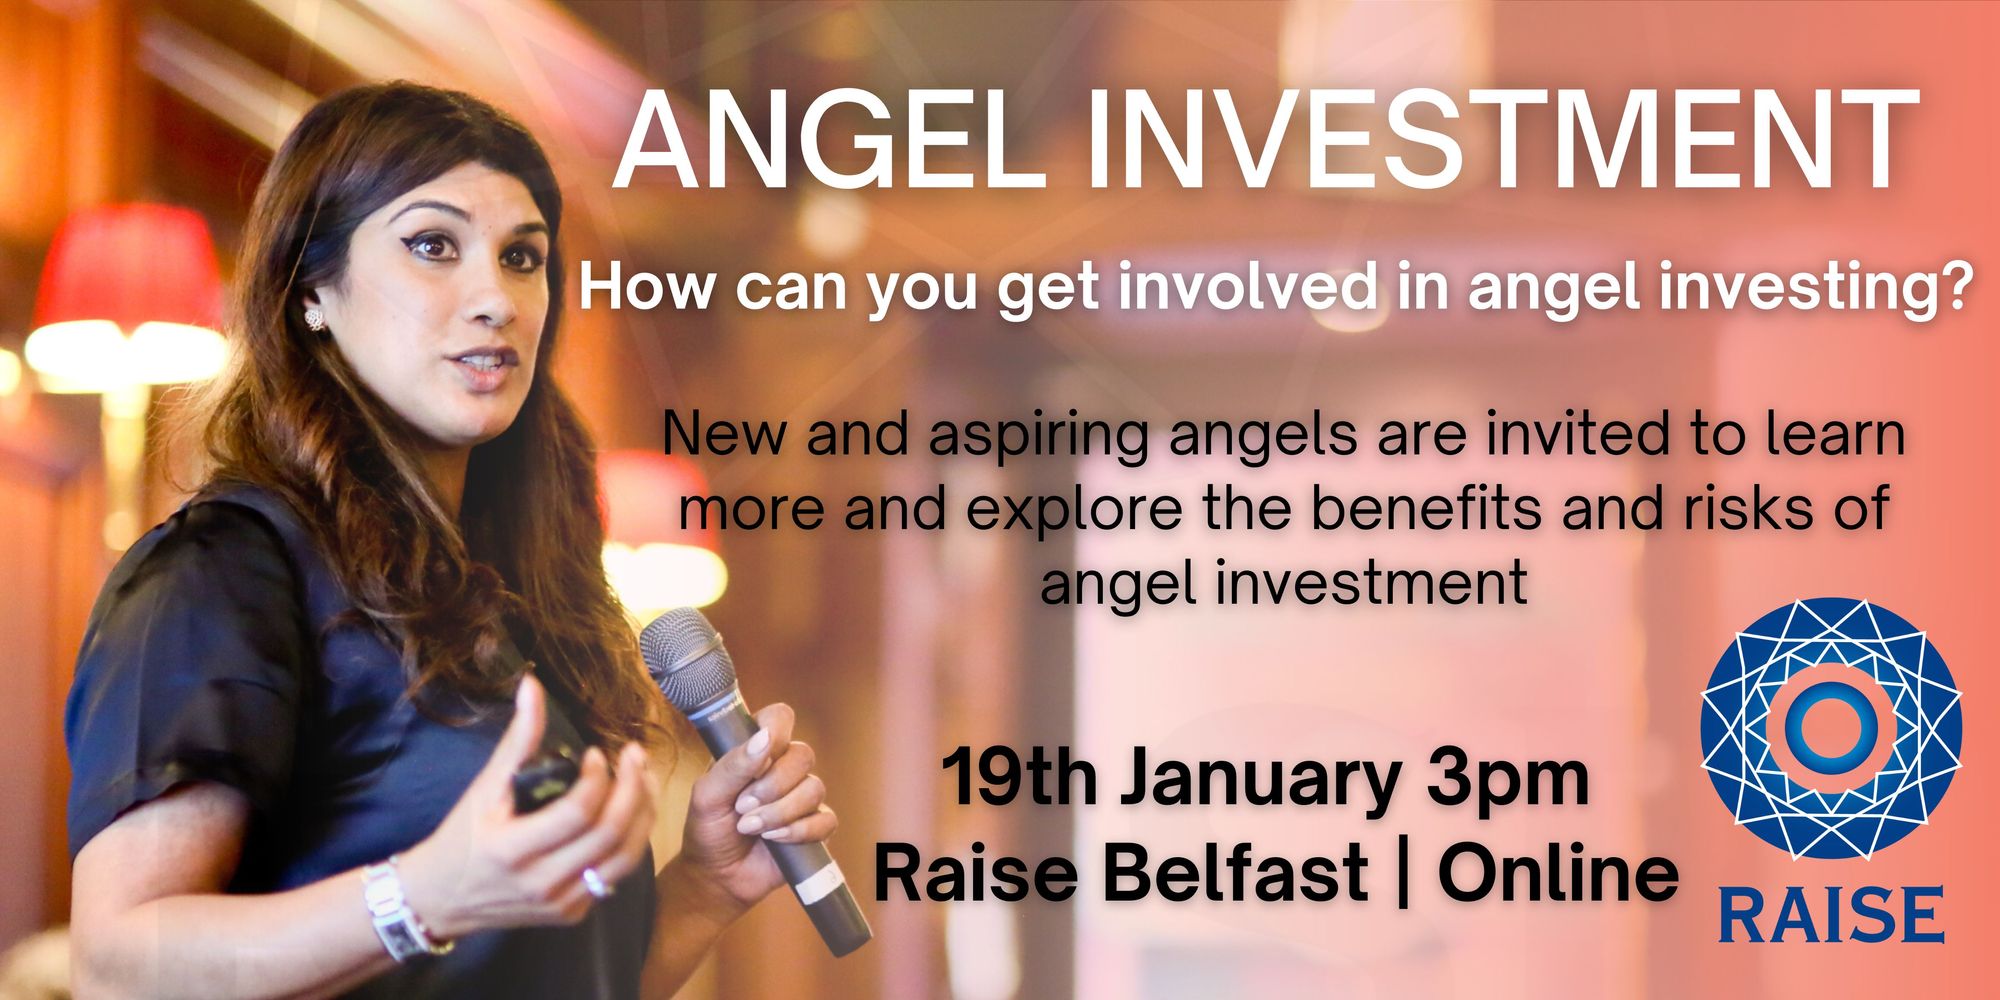 Graphic promoting an Angel Investment workshop on 19th January showing a woman pitching for investment